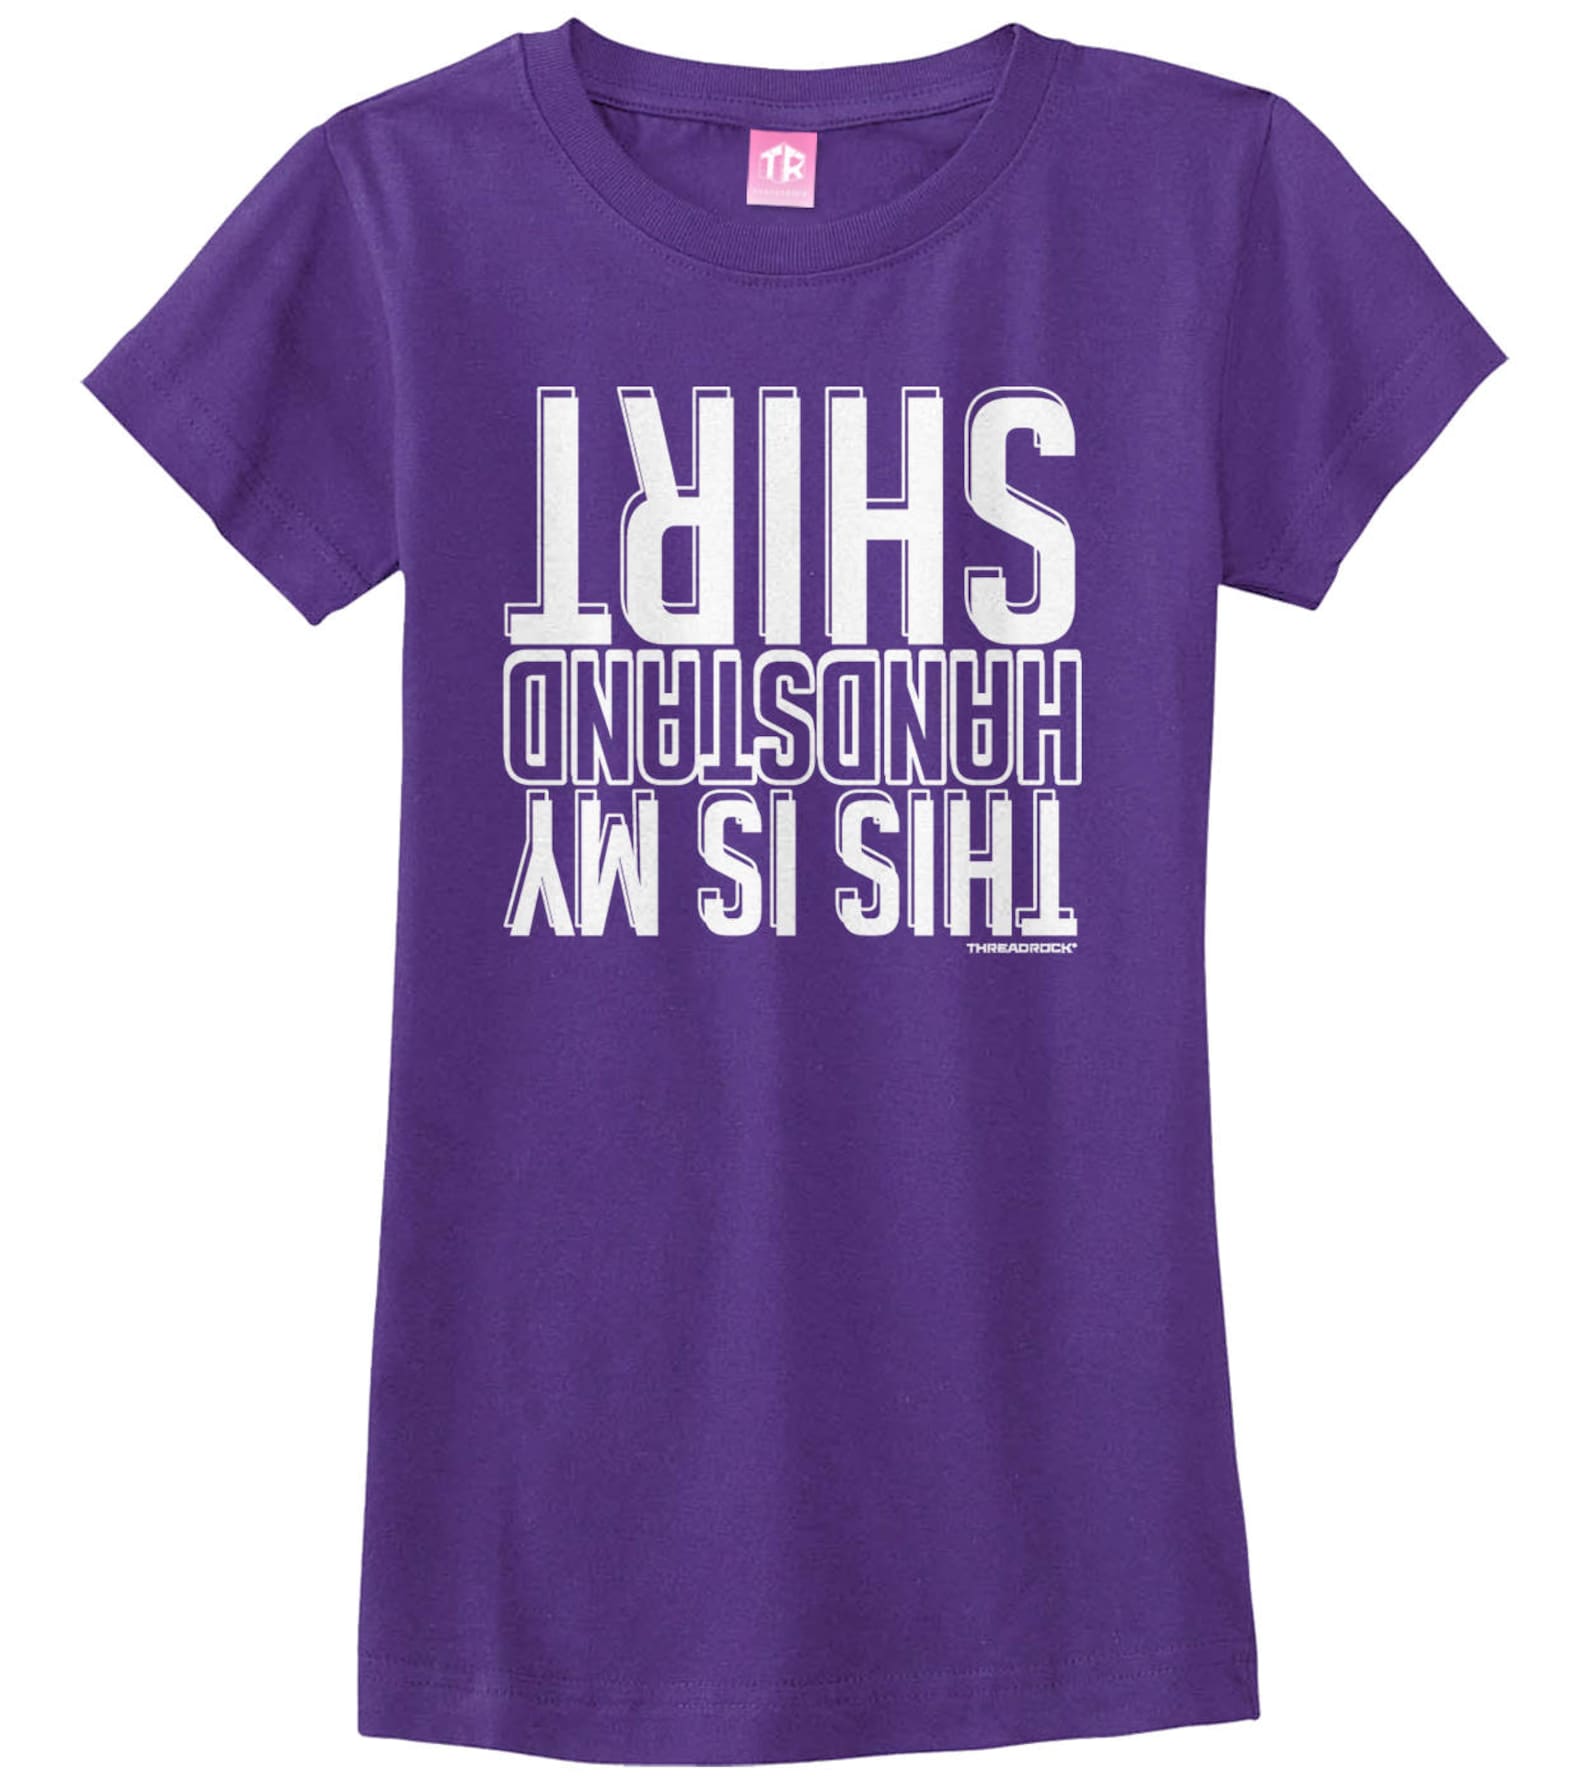 This is My Handstand Shirt Girls' Fitted T-shirt or Youth - Etsy